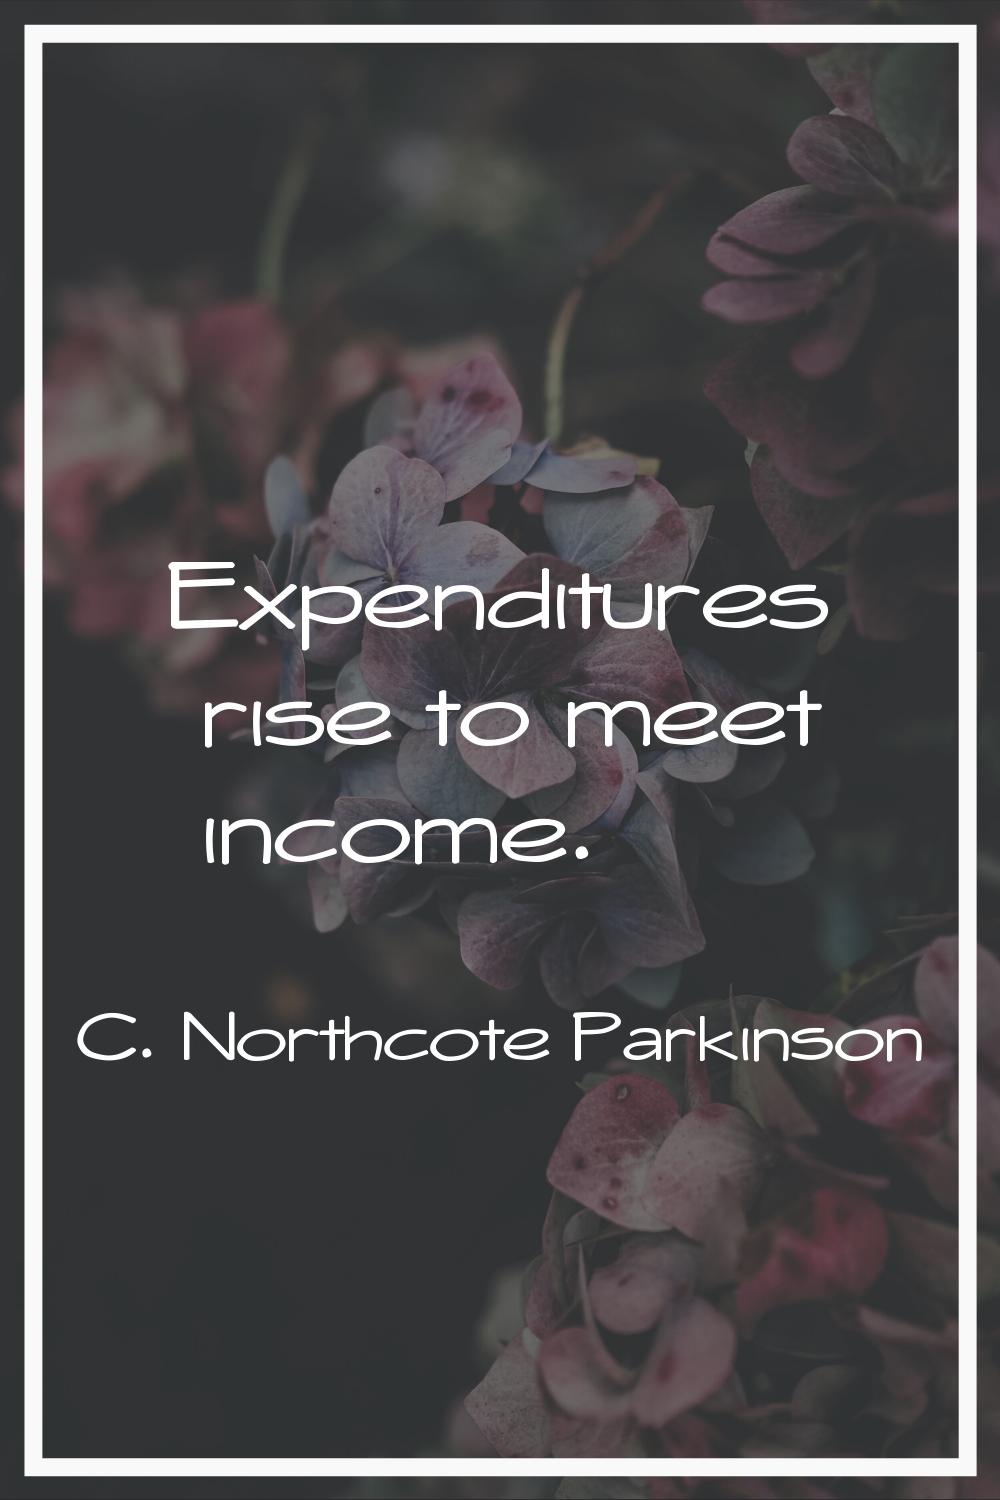 Expenditures rise to meet income.